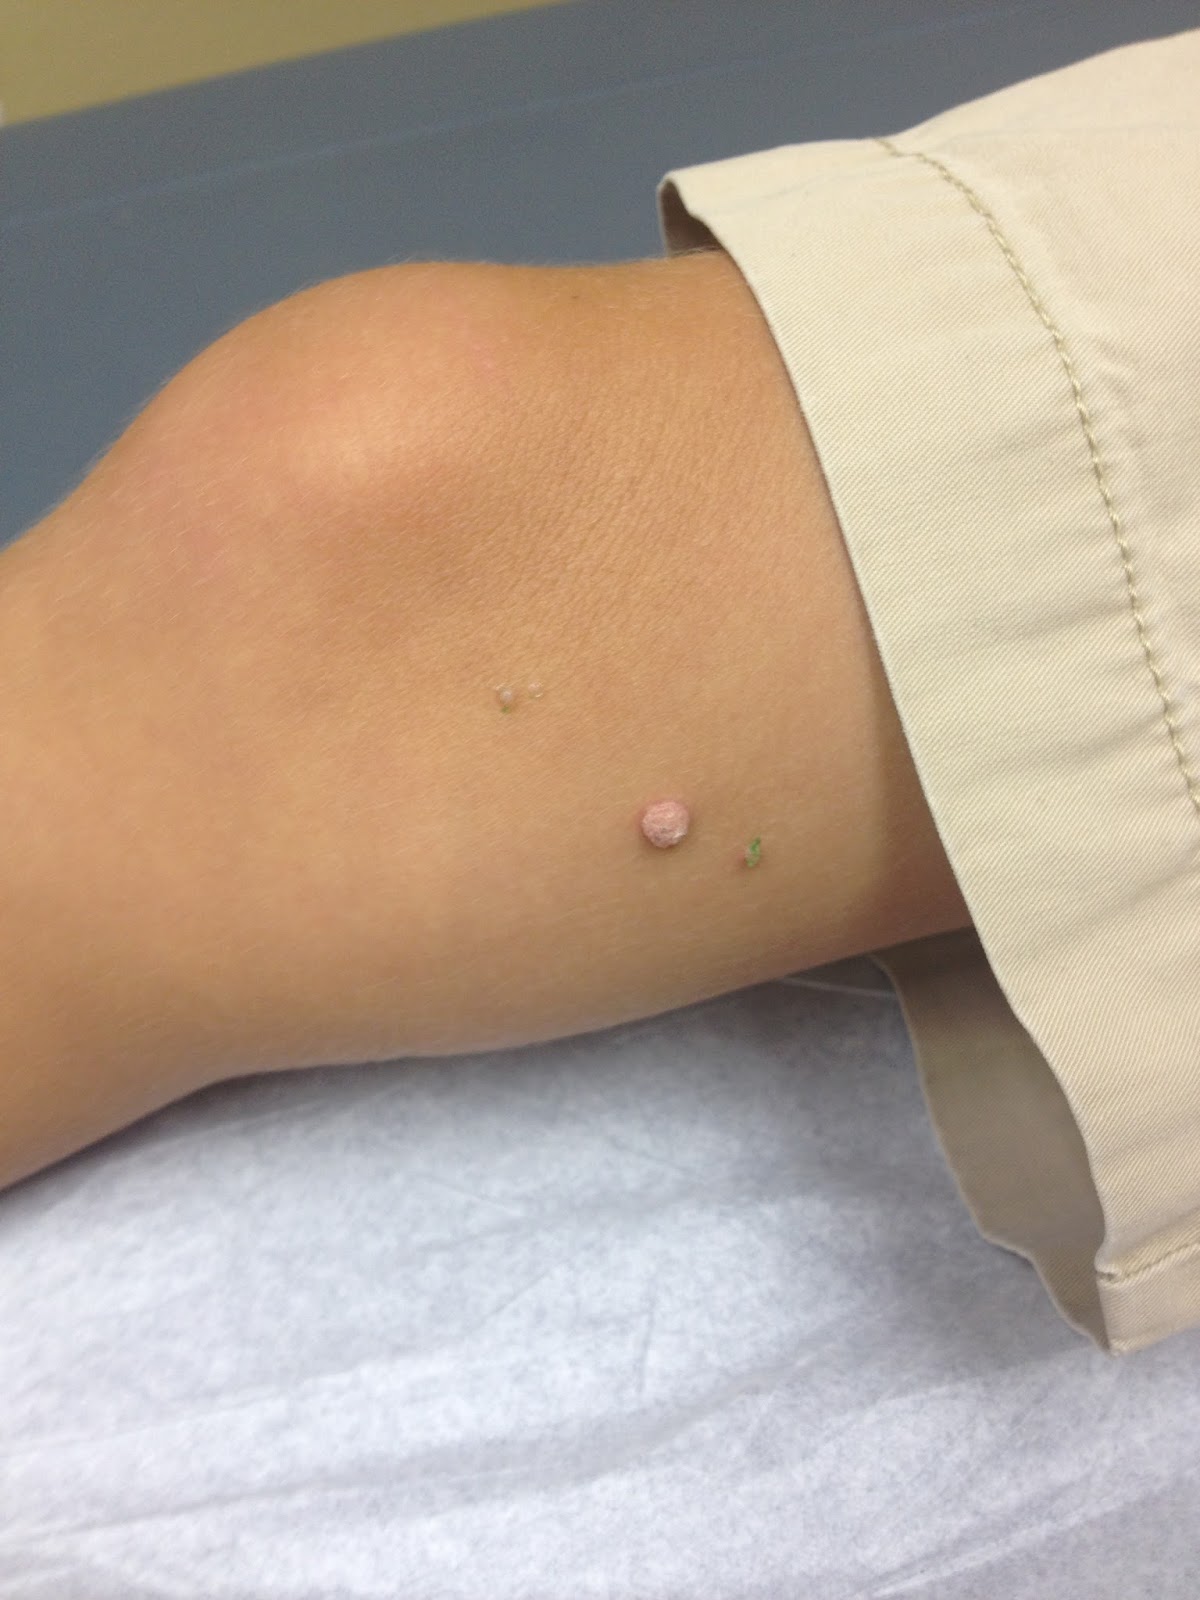 One of his knee warts before treatment. The green spots are the little 